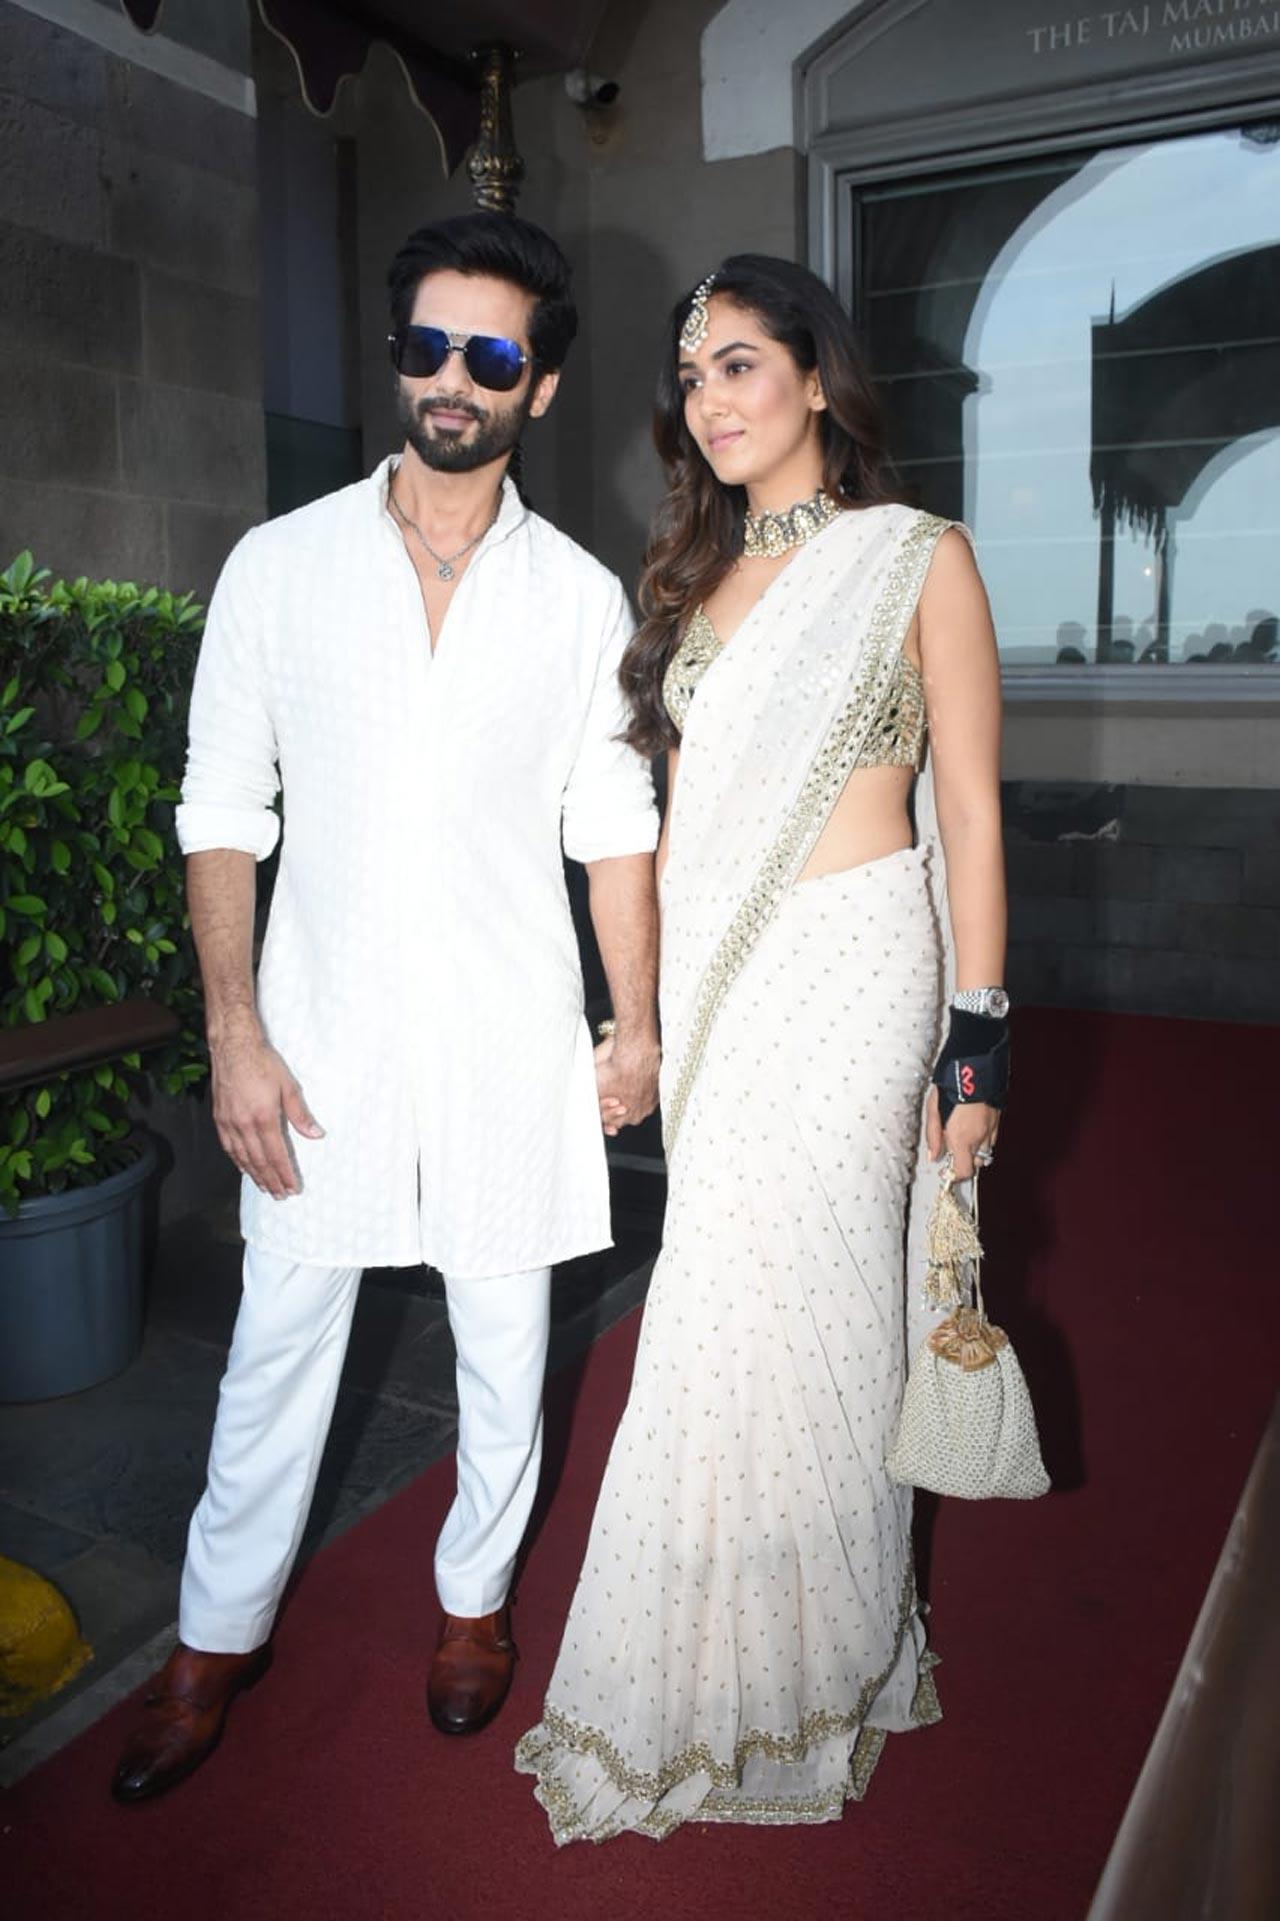 Shahid Kapoor and Mira Rajput posed together as they attended Kunal Rawal and Arpita Mehta's wedding ceremony in Mumbai. While Mira stunned in a white and golden saree, paired with a choker neckpiece and mang tika, she opted for minimal makeup for the day wedding ceremony